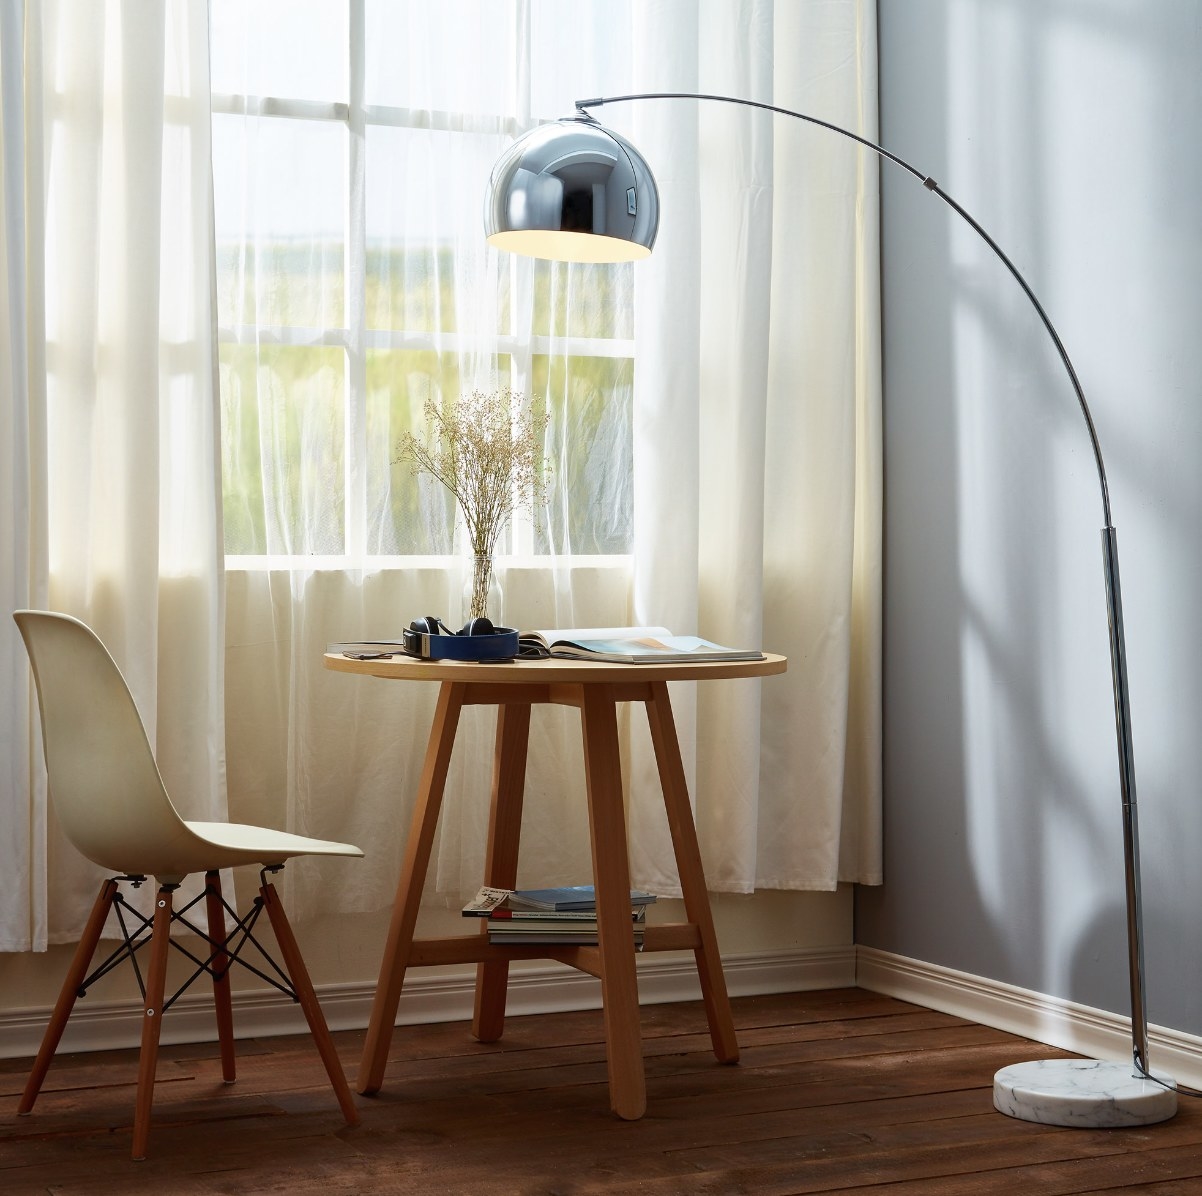 A silver floor lamp by a table and chair